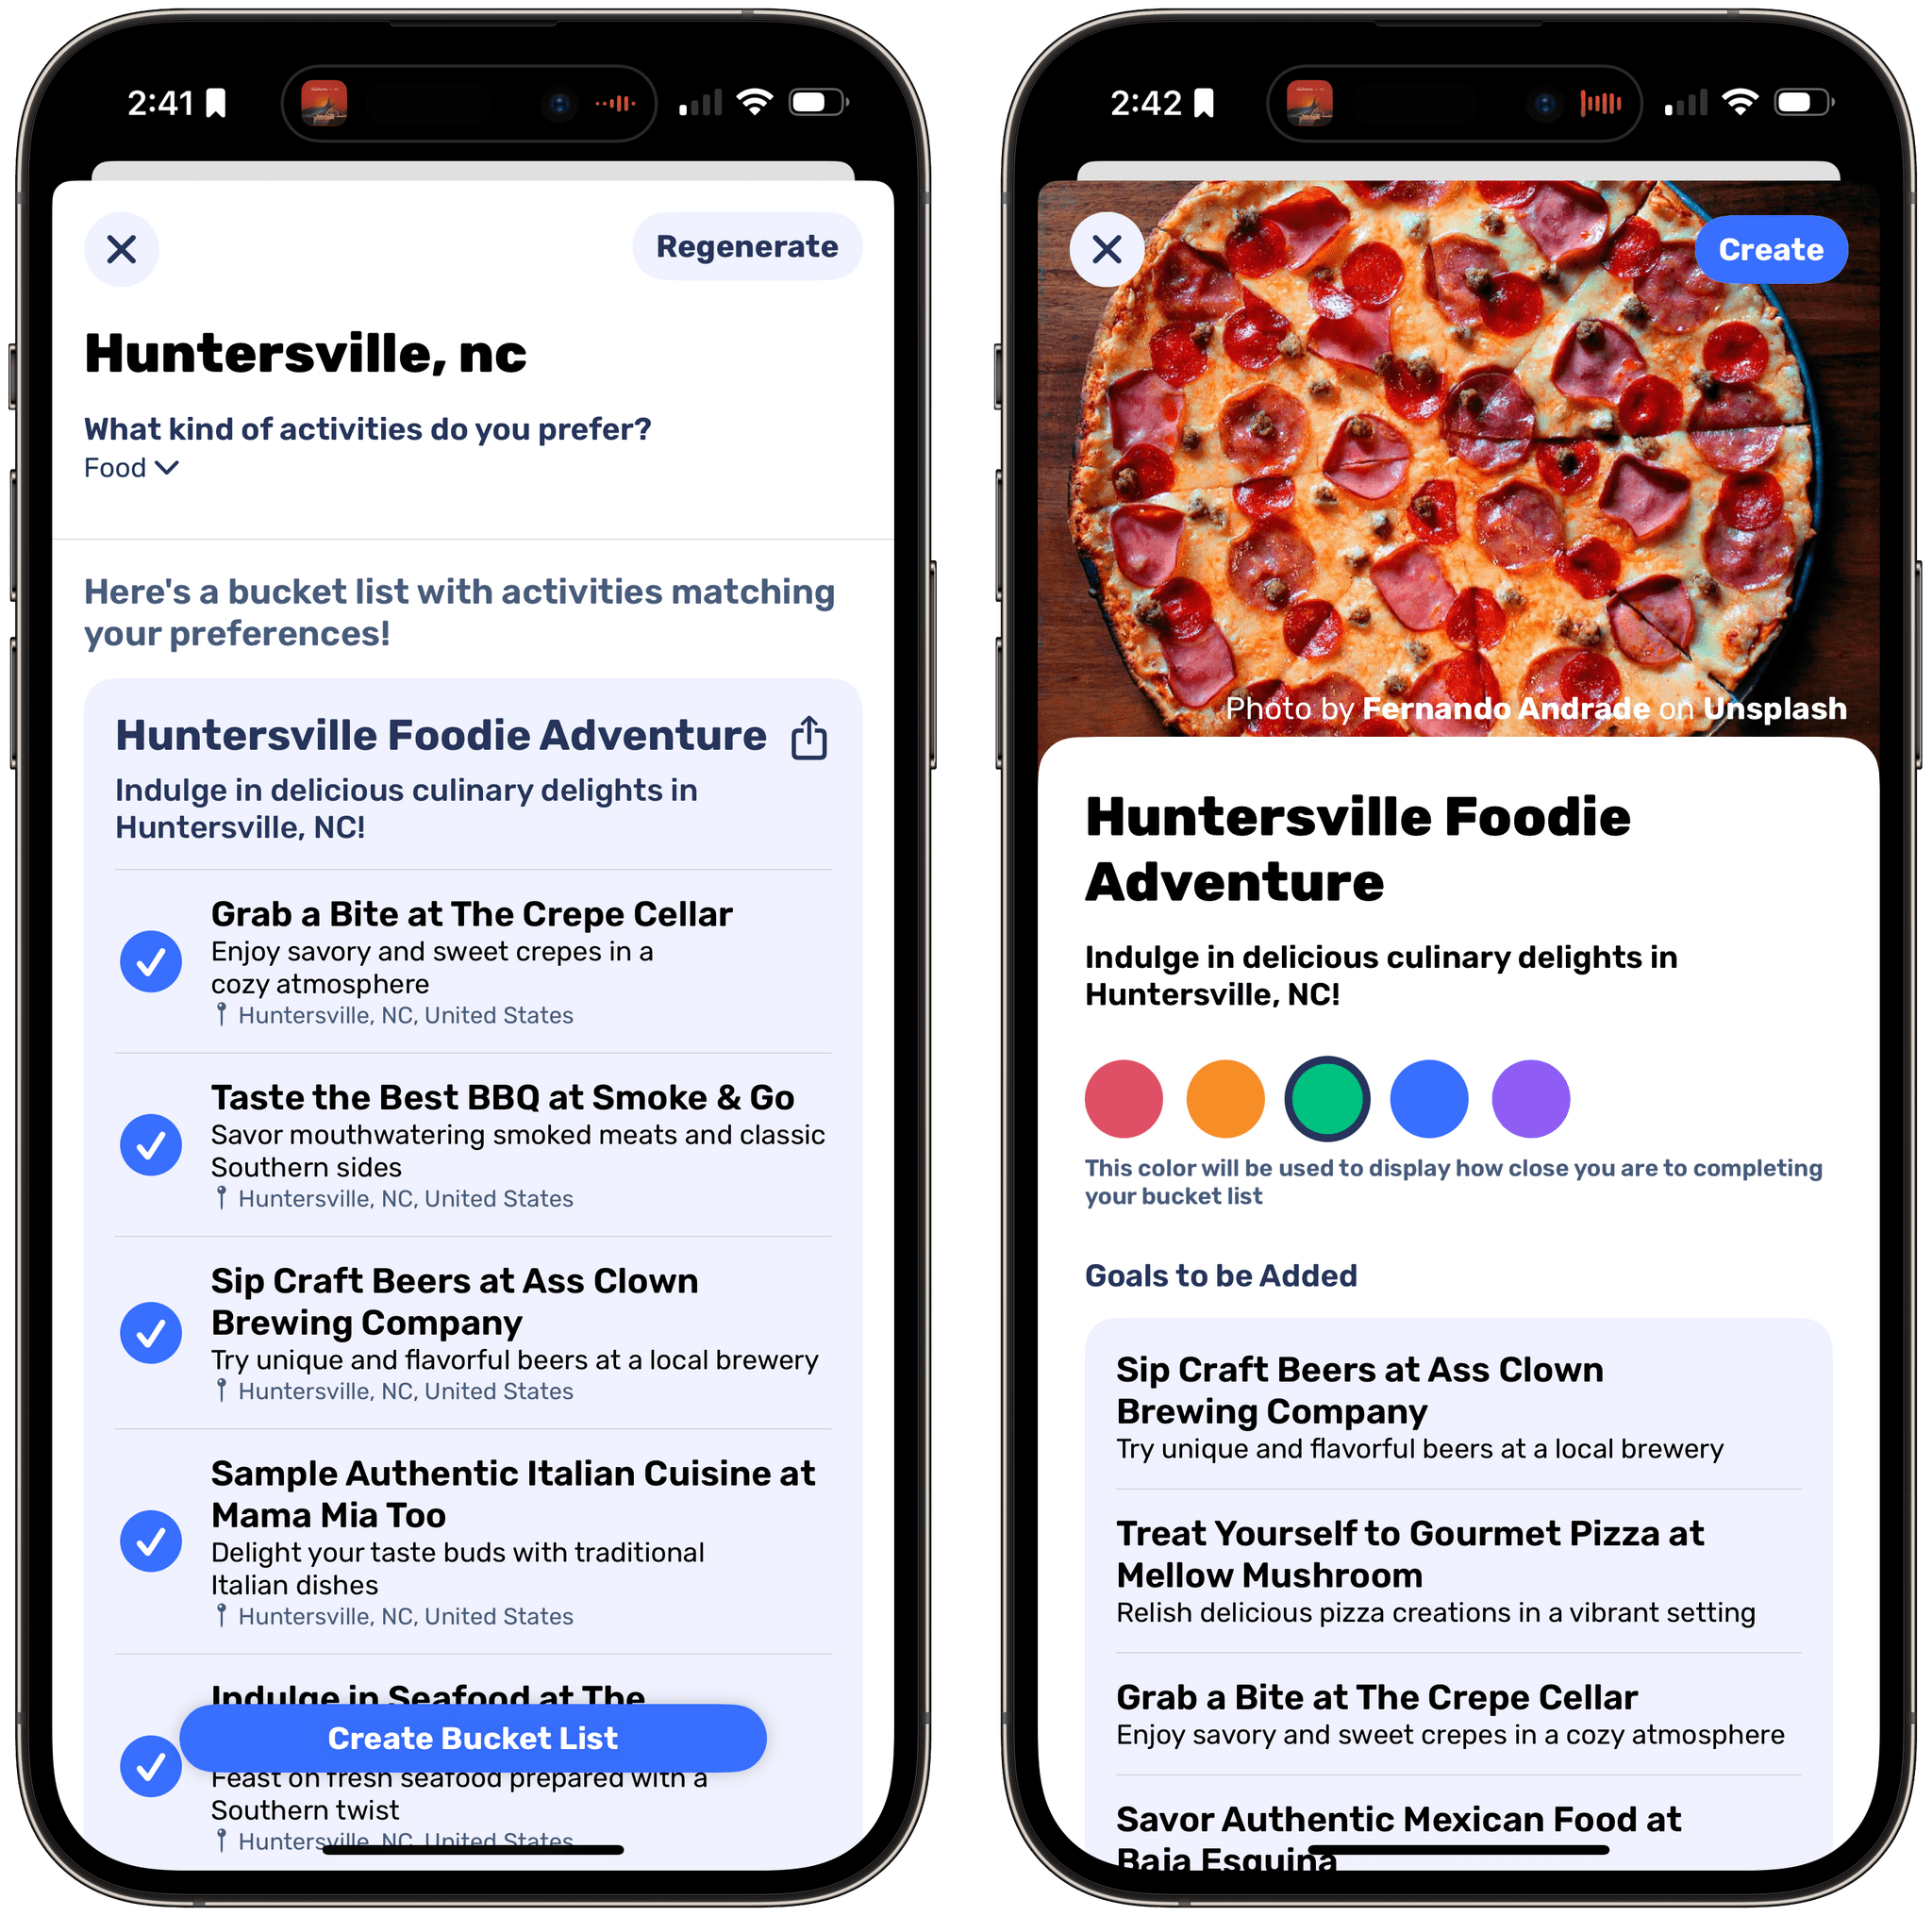 Creating a food-only list for a nearby town.